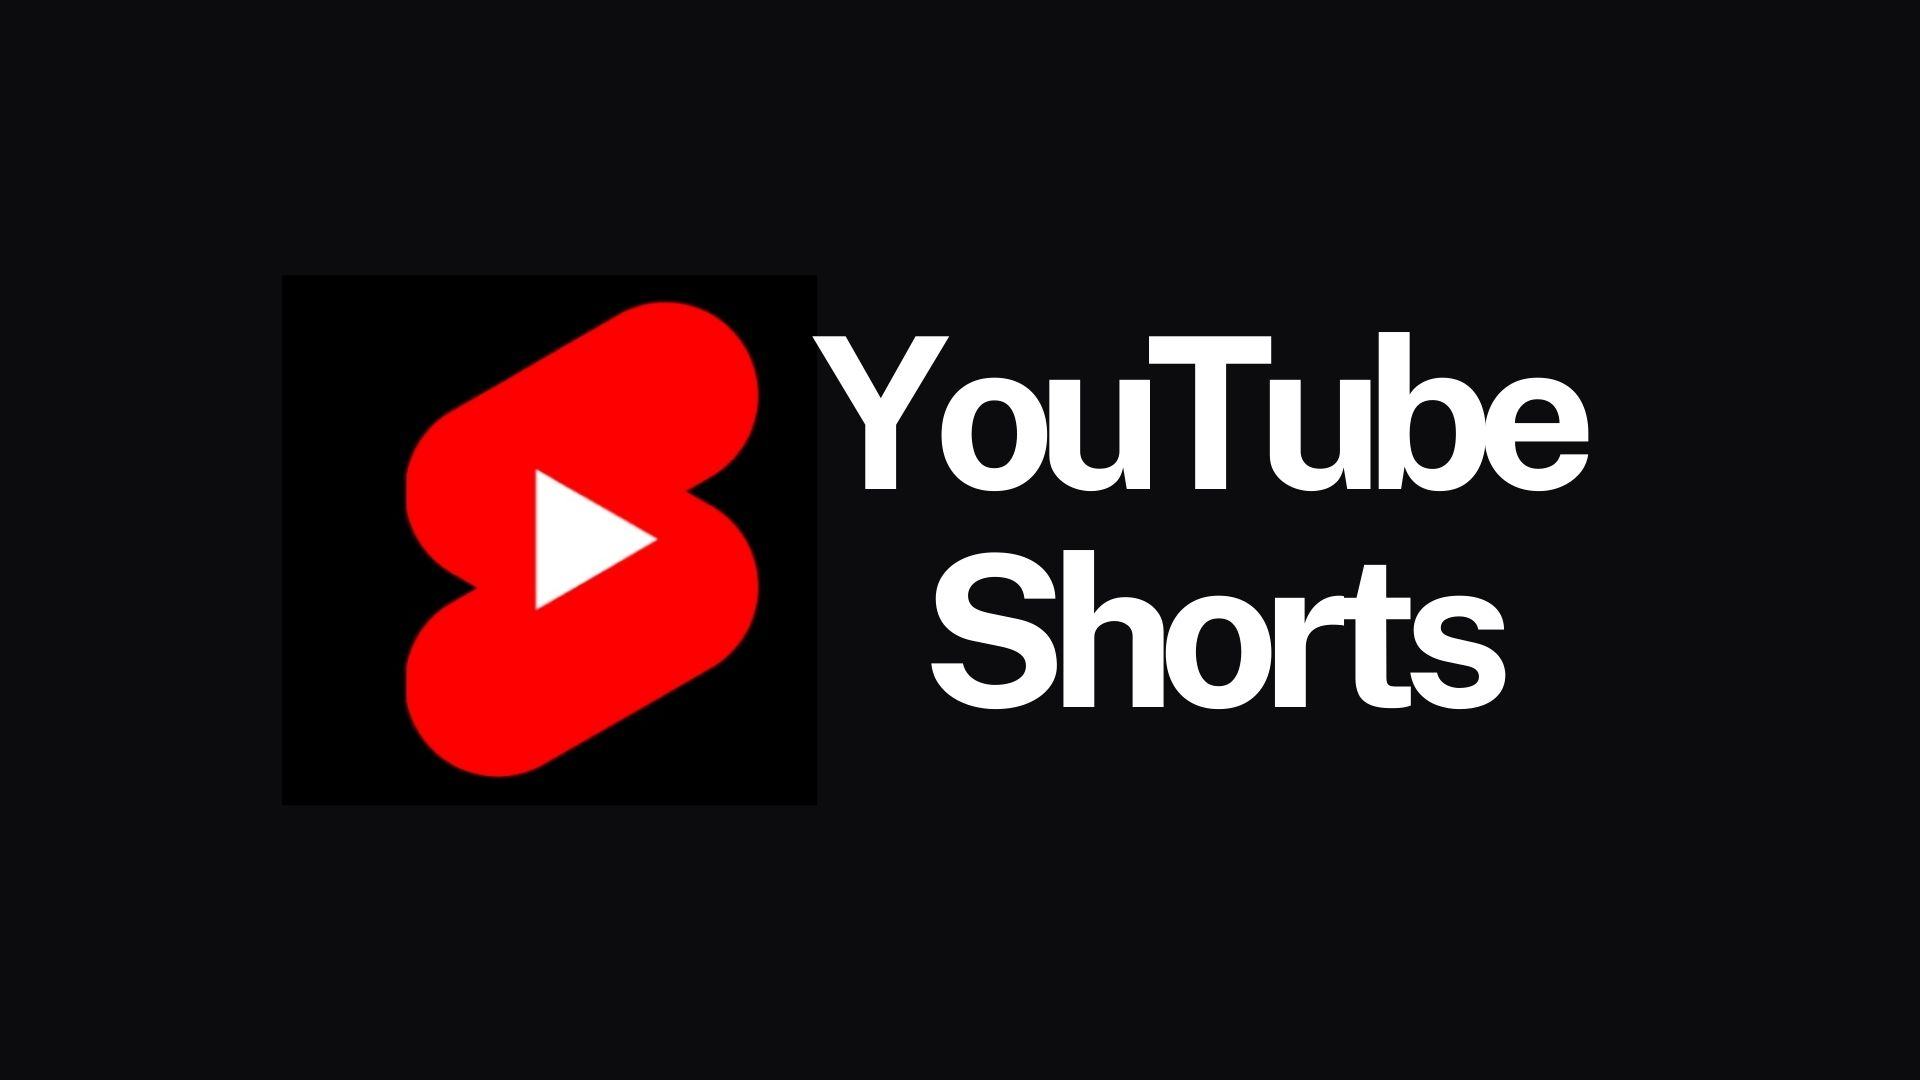 [FULL] How To Take Youtube Shorts Off - See the explanation!